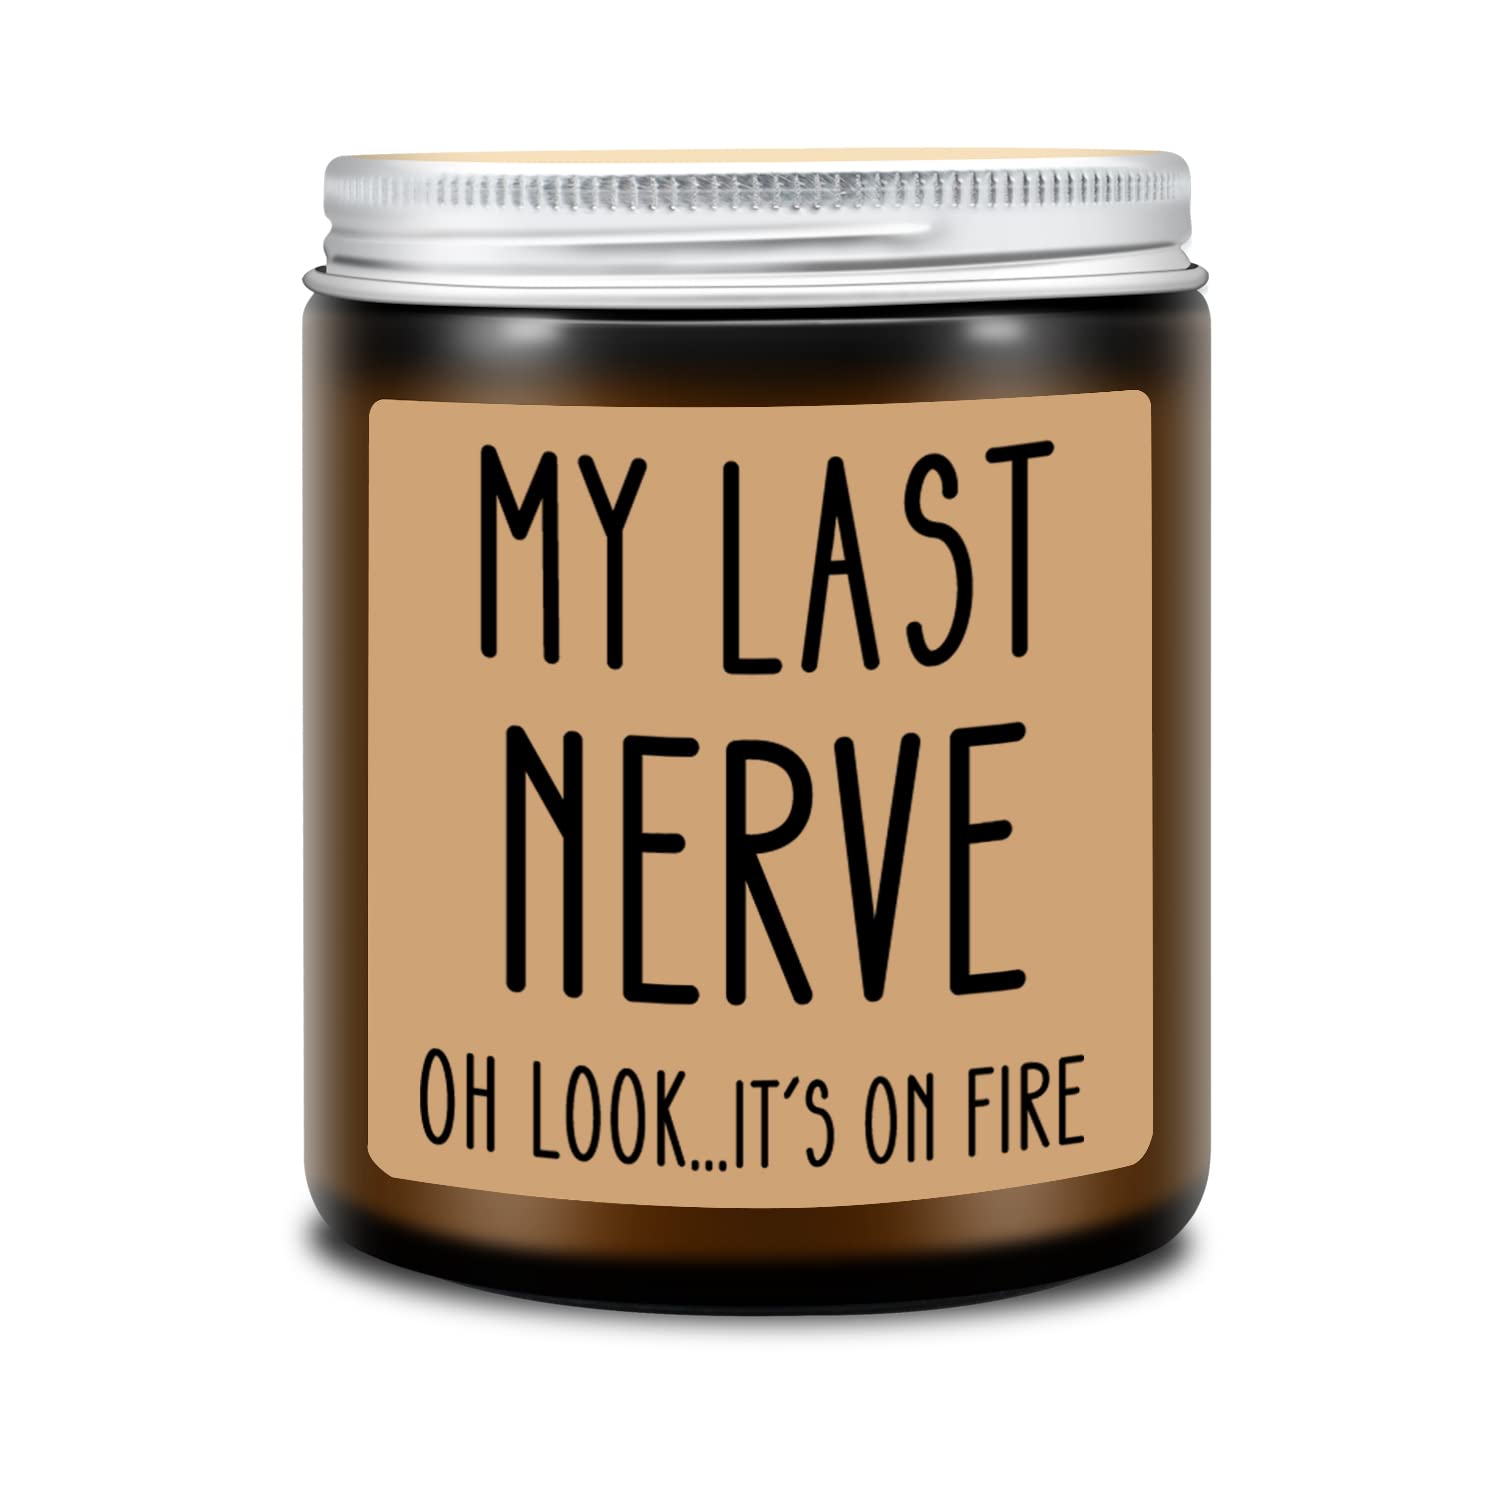 Homsolver Birthday Gifts for Women, Funny Gifts for Best Friend Women - My Last Nerve Candle - Unique Birthday Gifts for Women, Her, Mom, BFF, Best Friends, Girlfriend, Sister